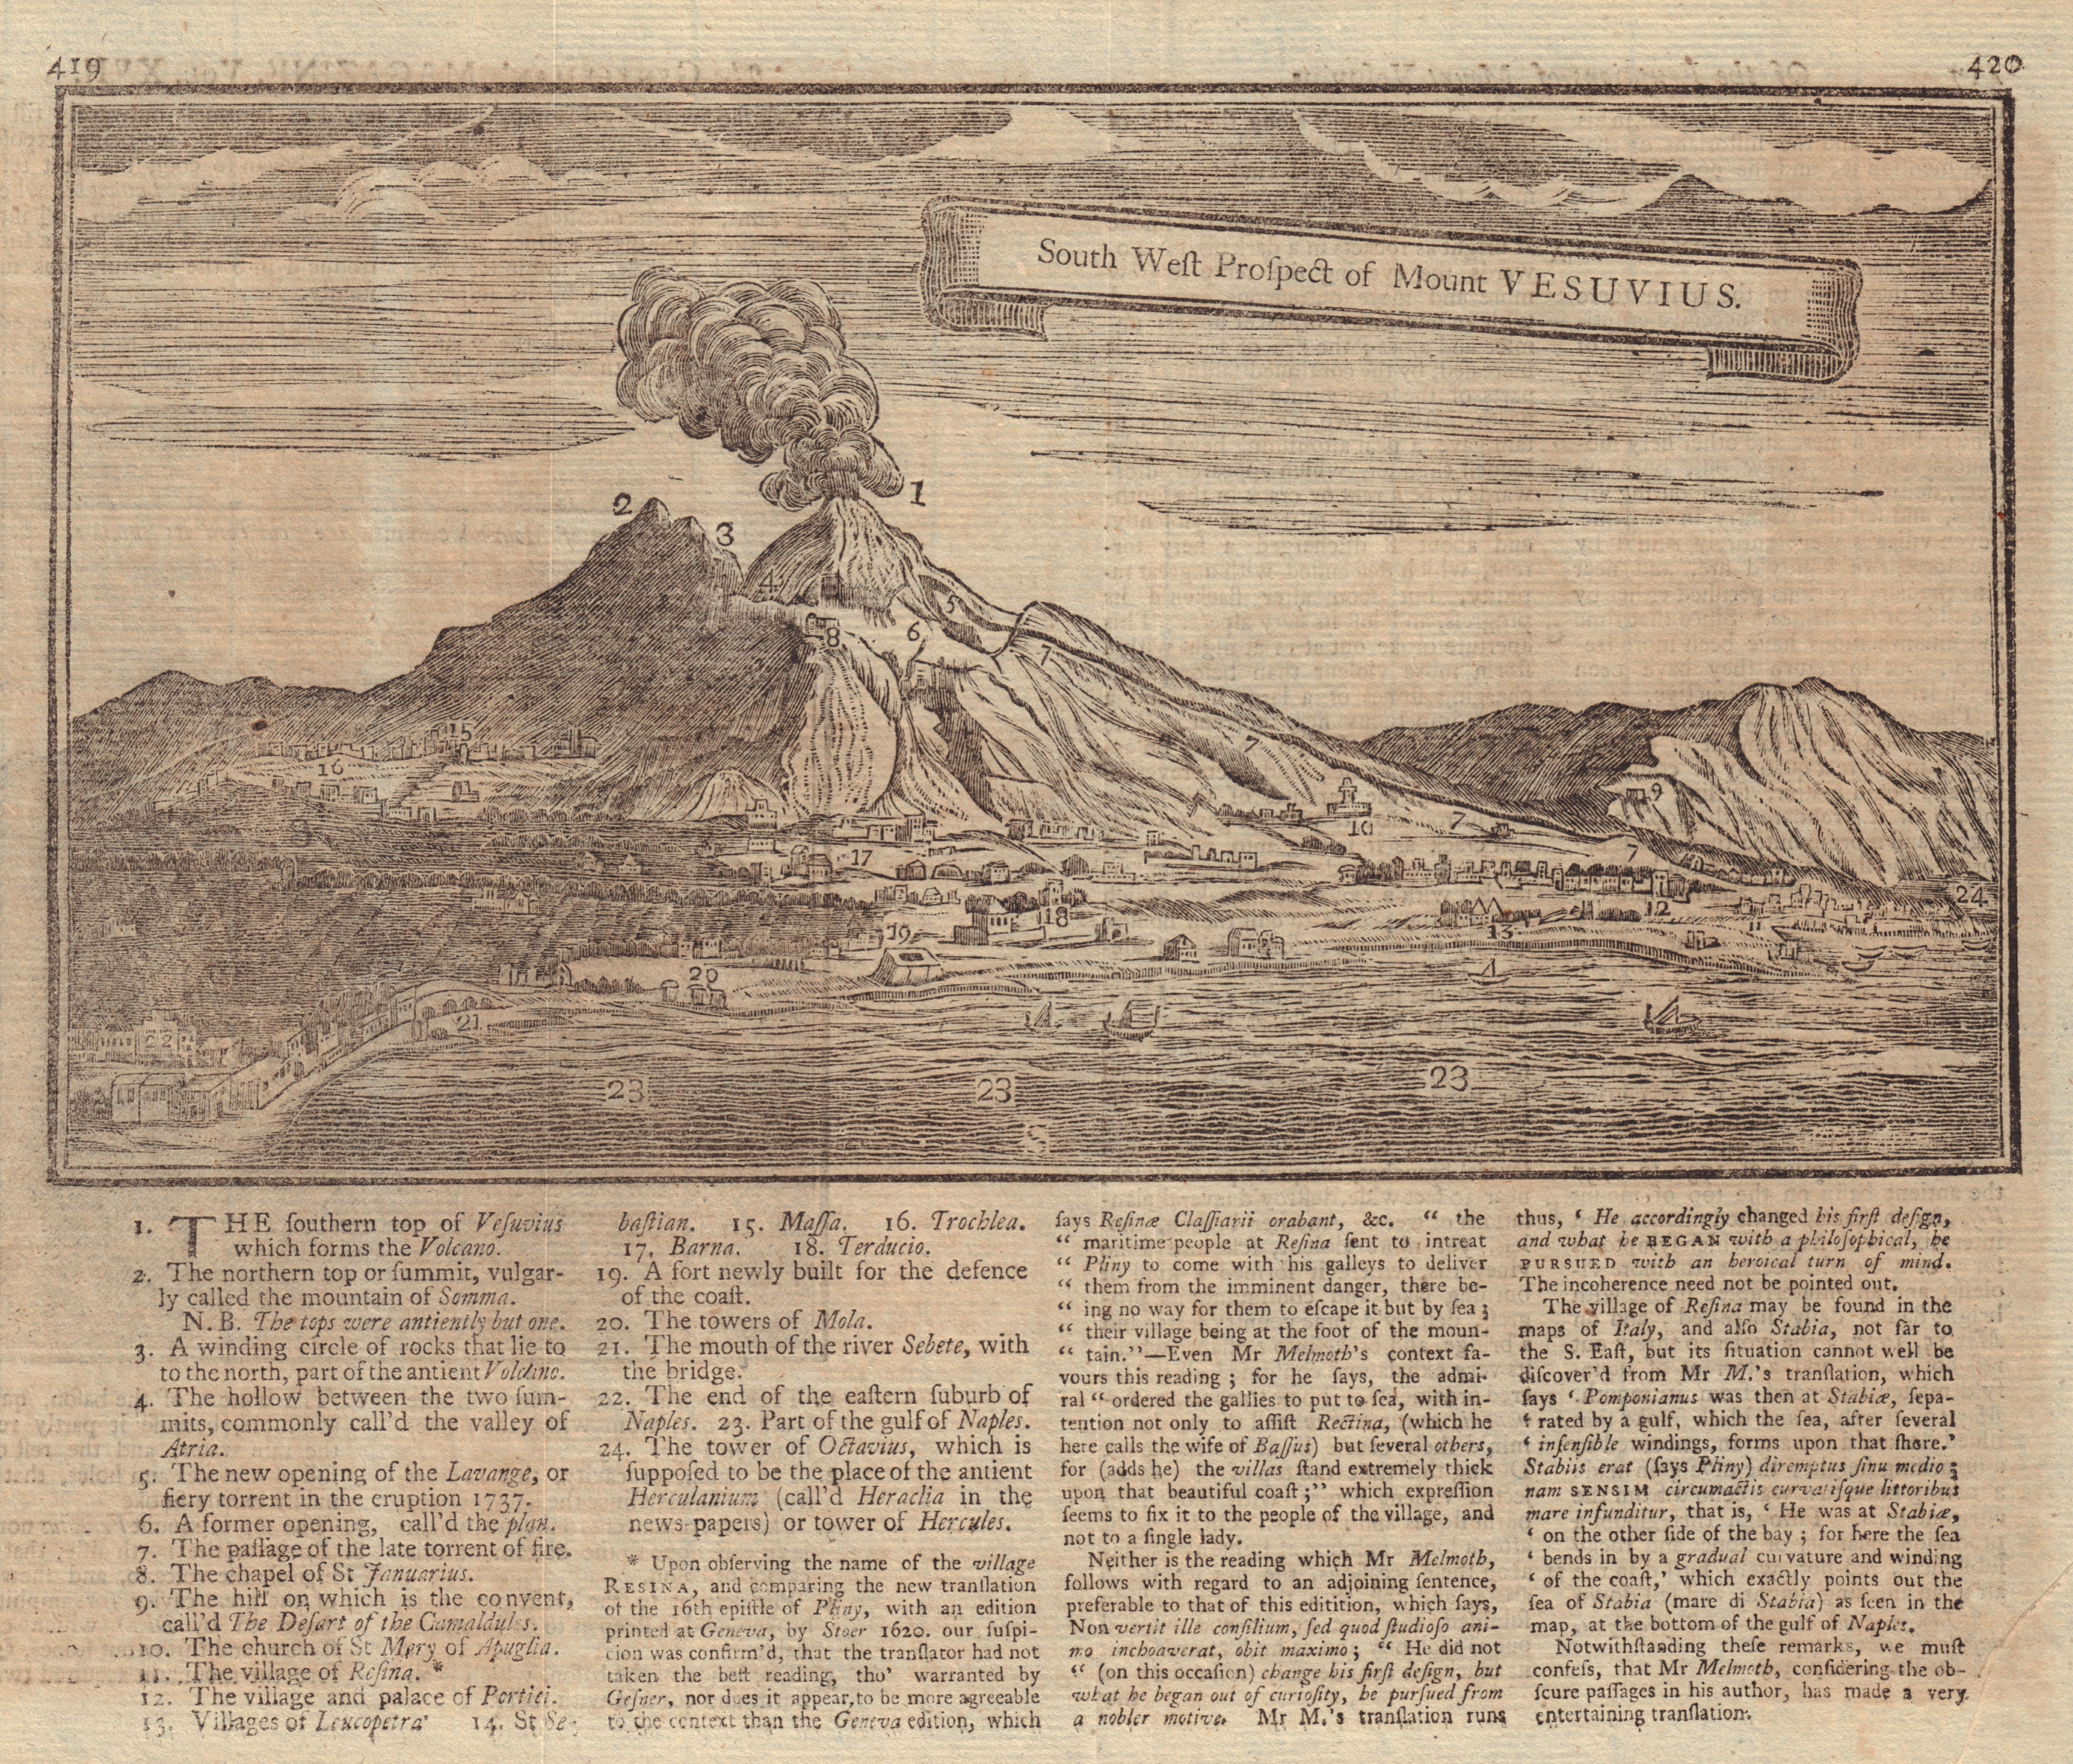 Associate Product South West Prospect of Mount Vesuvius at the time of the explosion/eruption 1747